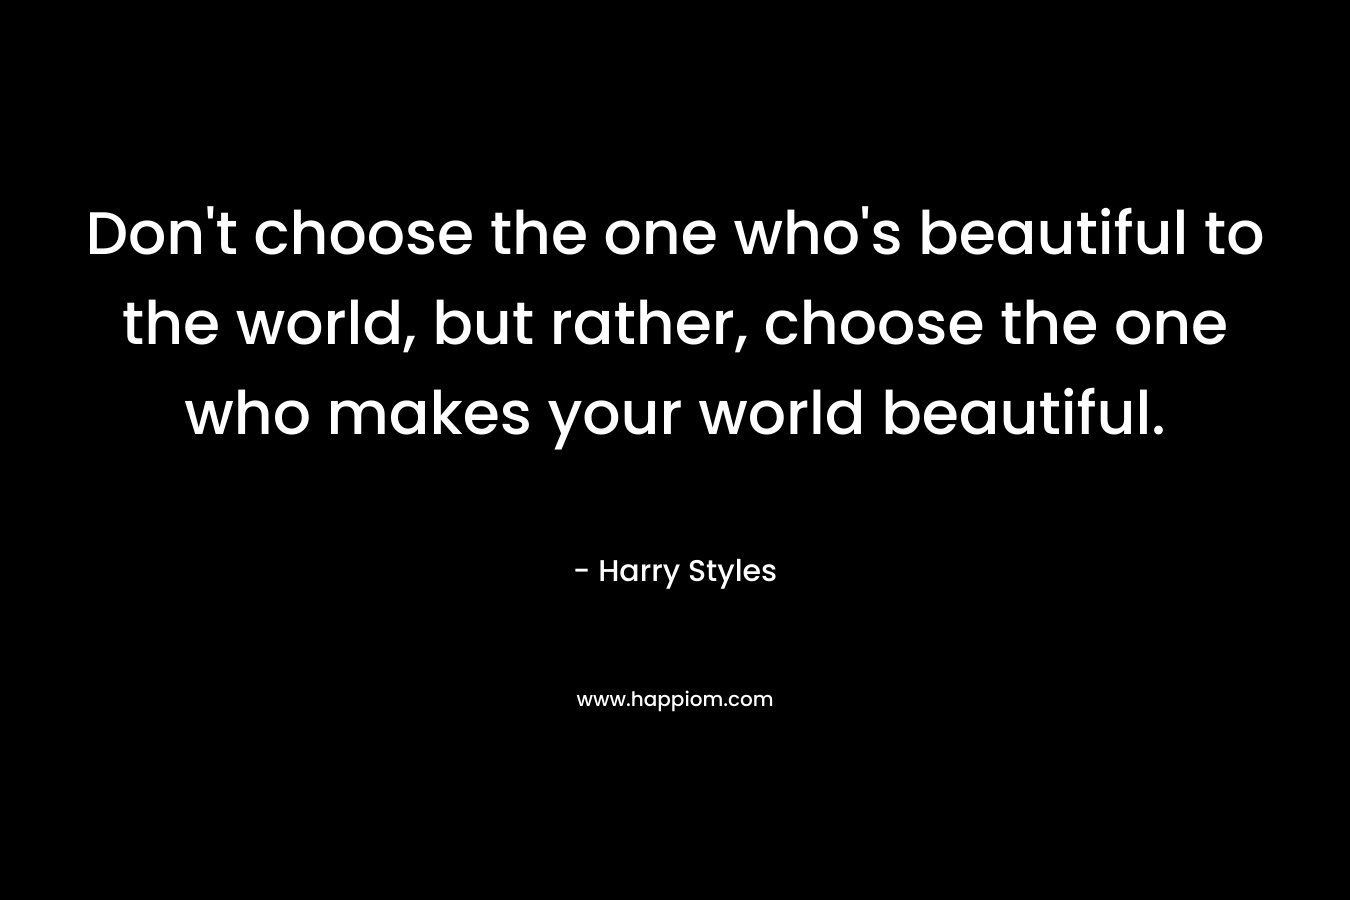 Don’t choose the one who’s beautiful to the world, but rather, choose the one who makes your world beautiful. – Harry Styles